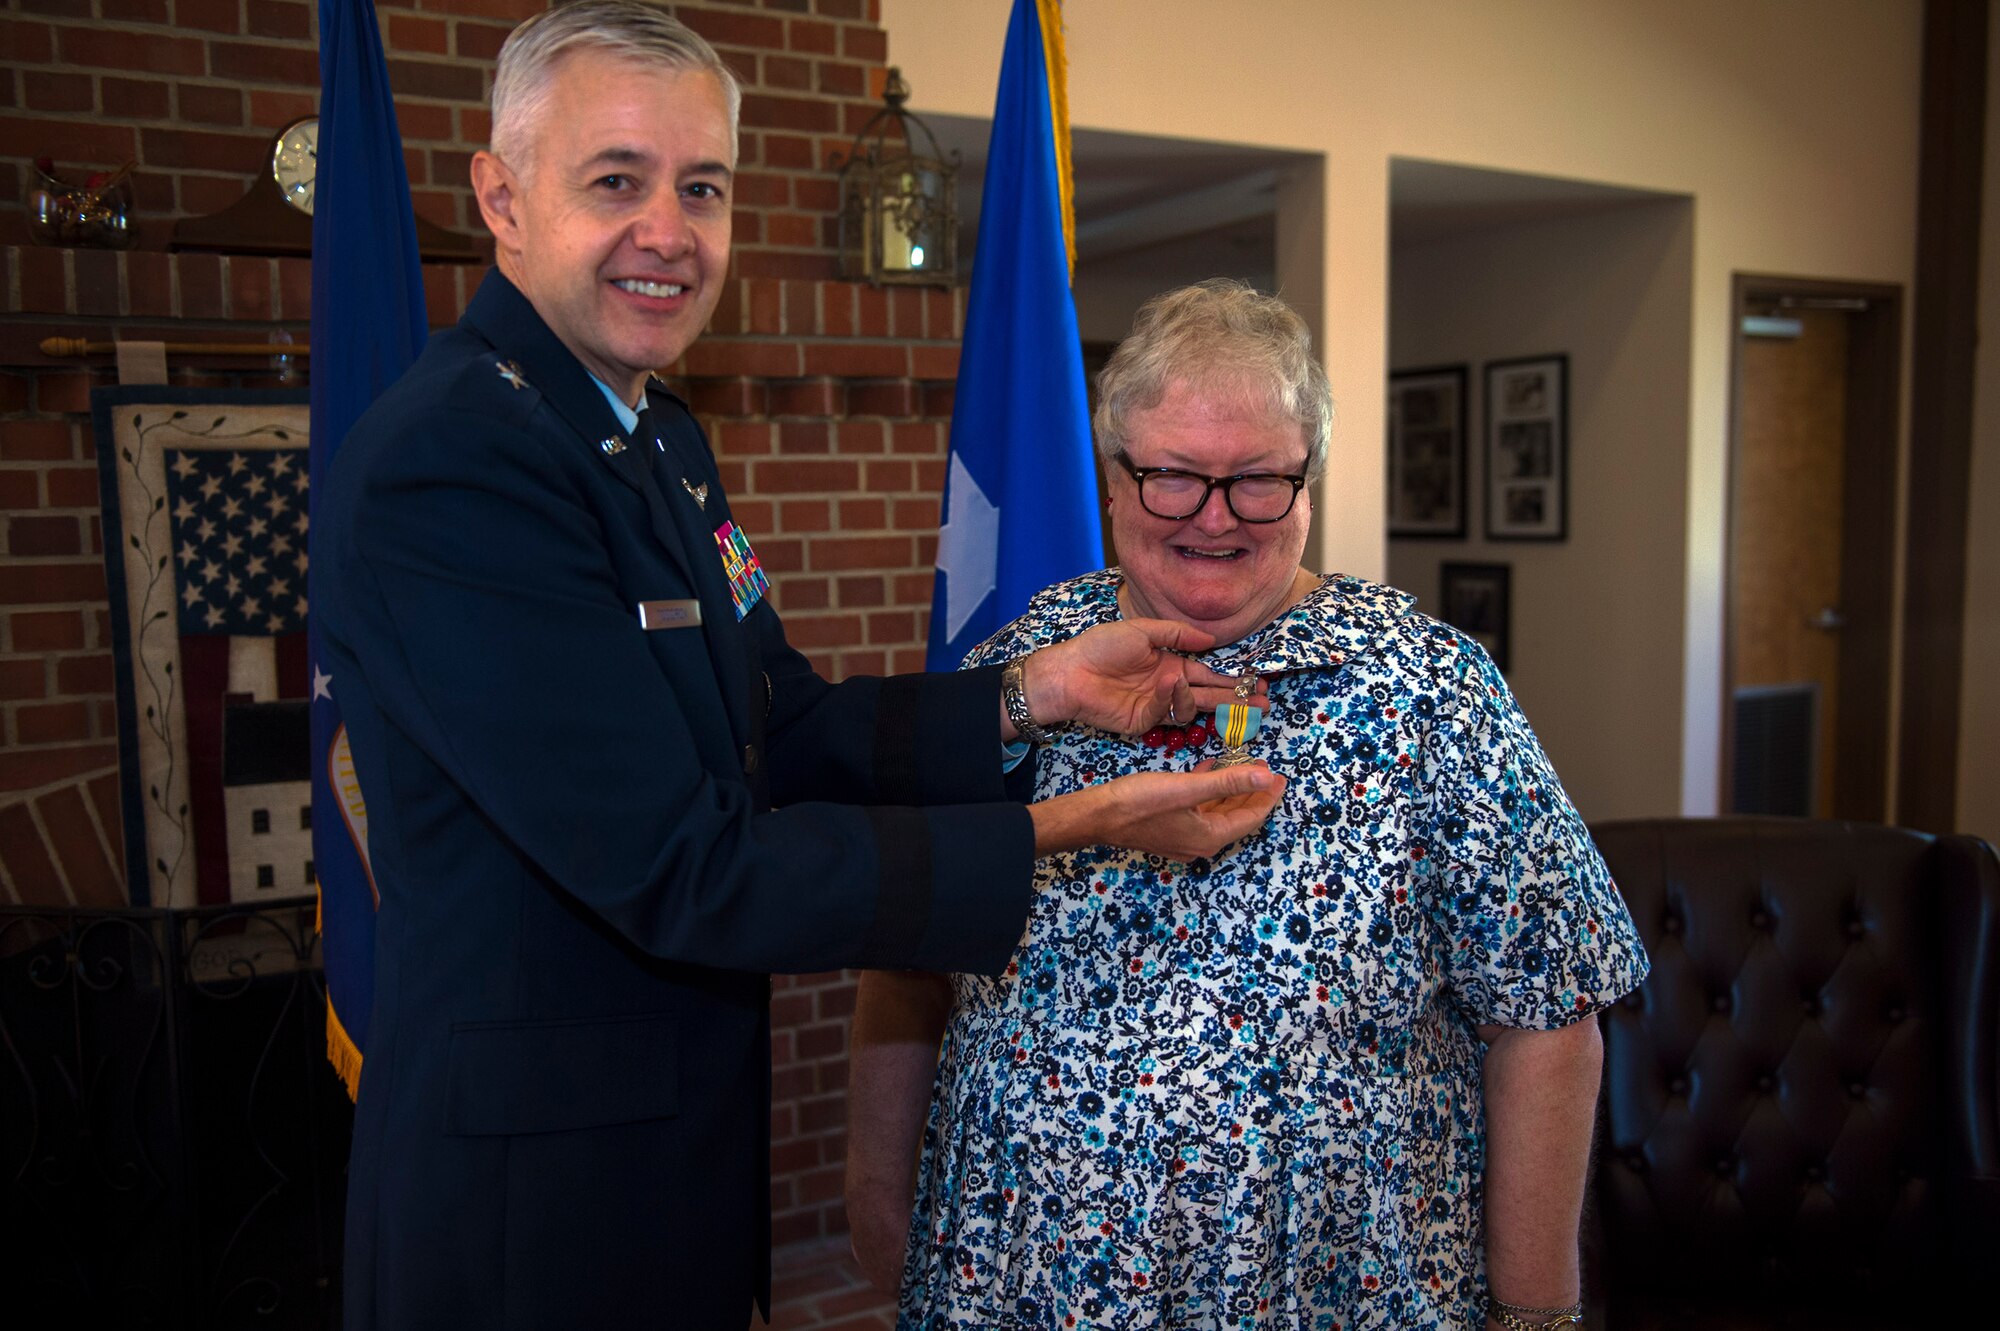 U.S. Air Force Retired Brigadier General Kenneth Todorov, former 23d Wing commander, places a Meritorious Civilian Service Medal on Ann Lukens, 23d Force Support Squadron school liaison officer, during her retirement ceremony, Sept. 30, 2016, at Moody Air Force, Ga. Lukens served as the bases’ first and only school liaison officer, advocating for the educational needs of approximately 1400 children of Team Moody personnel. (U.S. Air Force photo by Airman 1st Class Greg Nash)